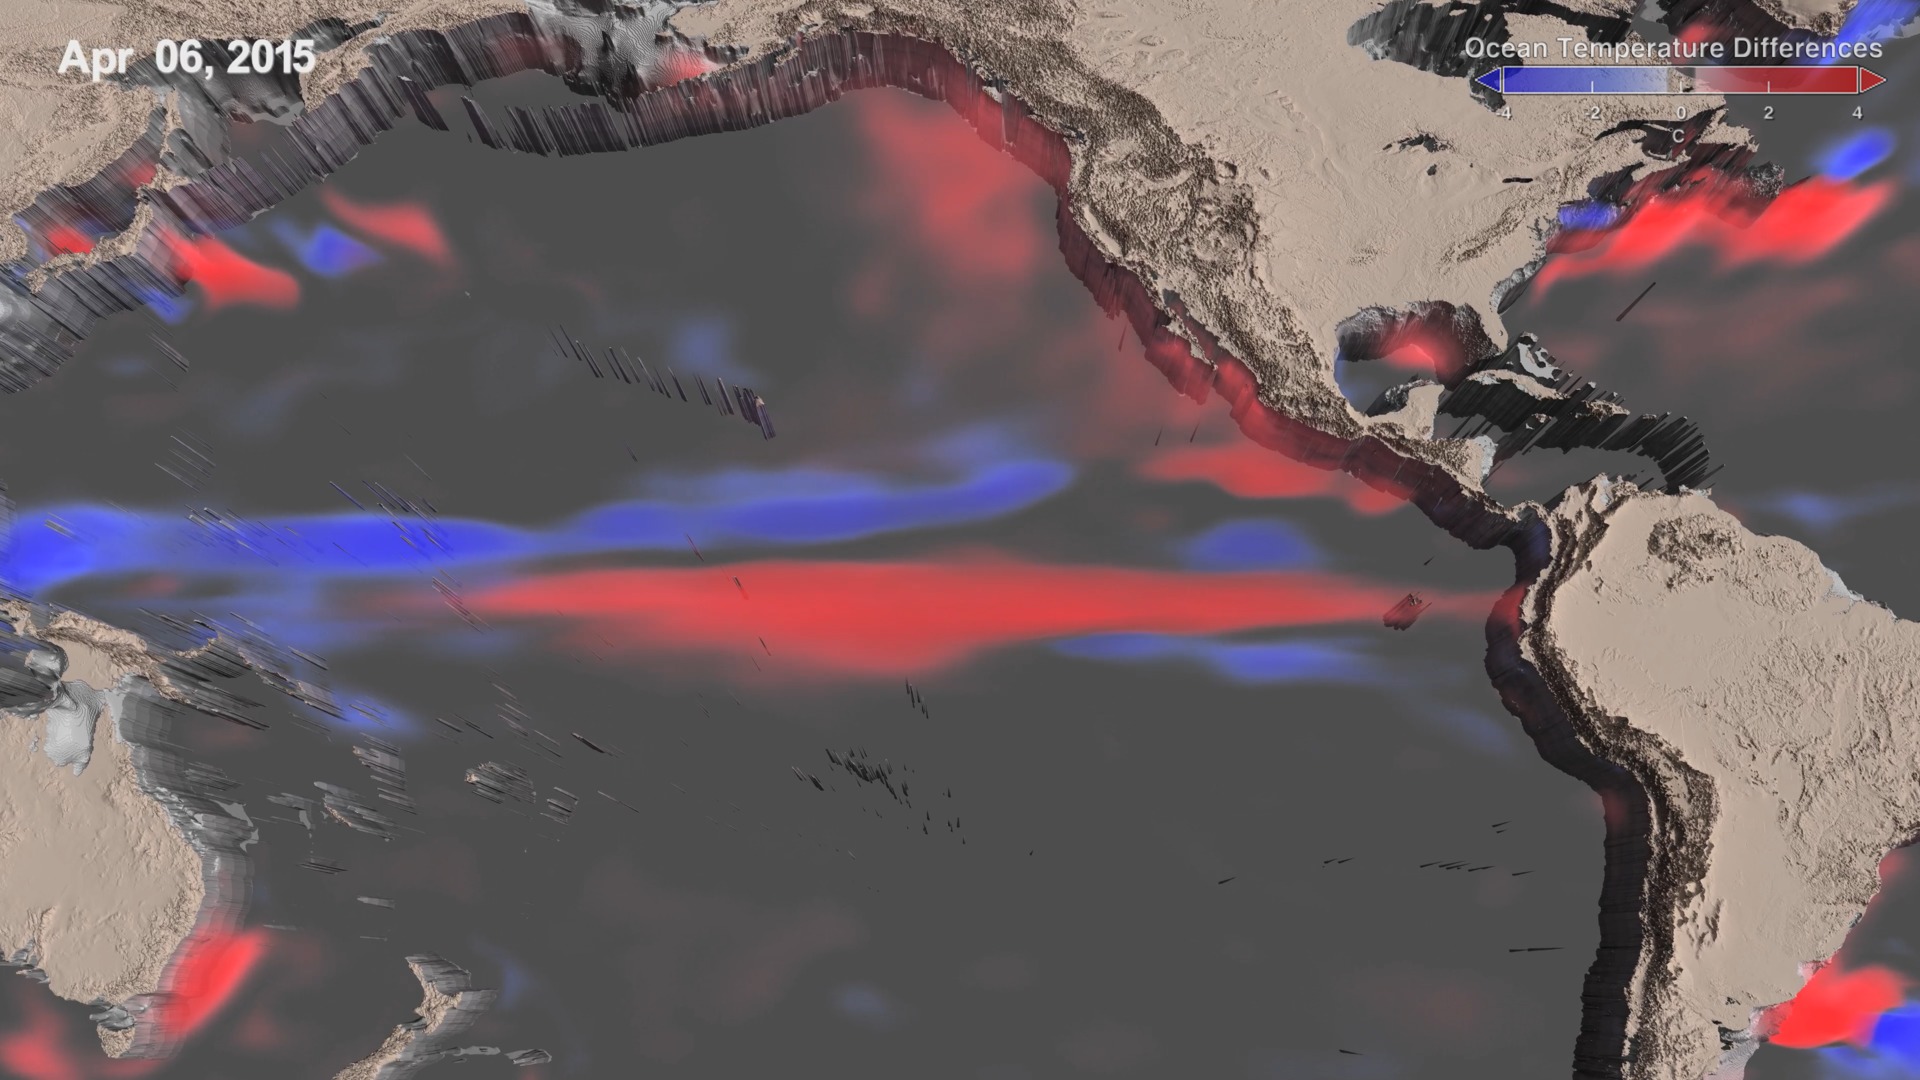 Preview Image for Tracking El Niño